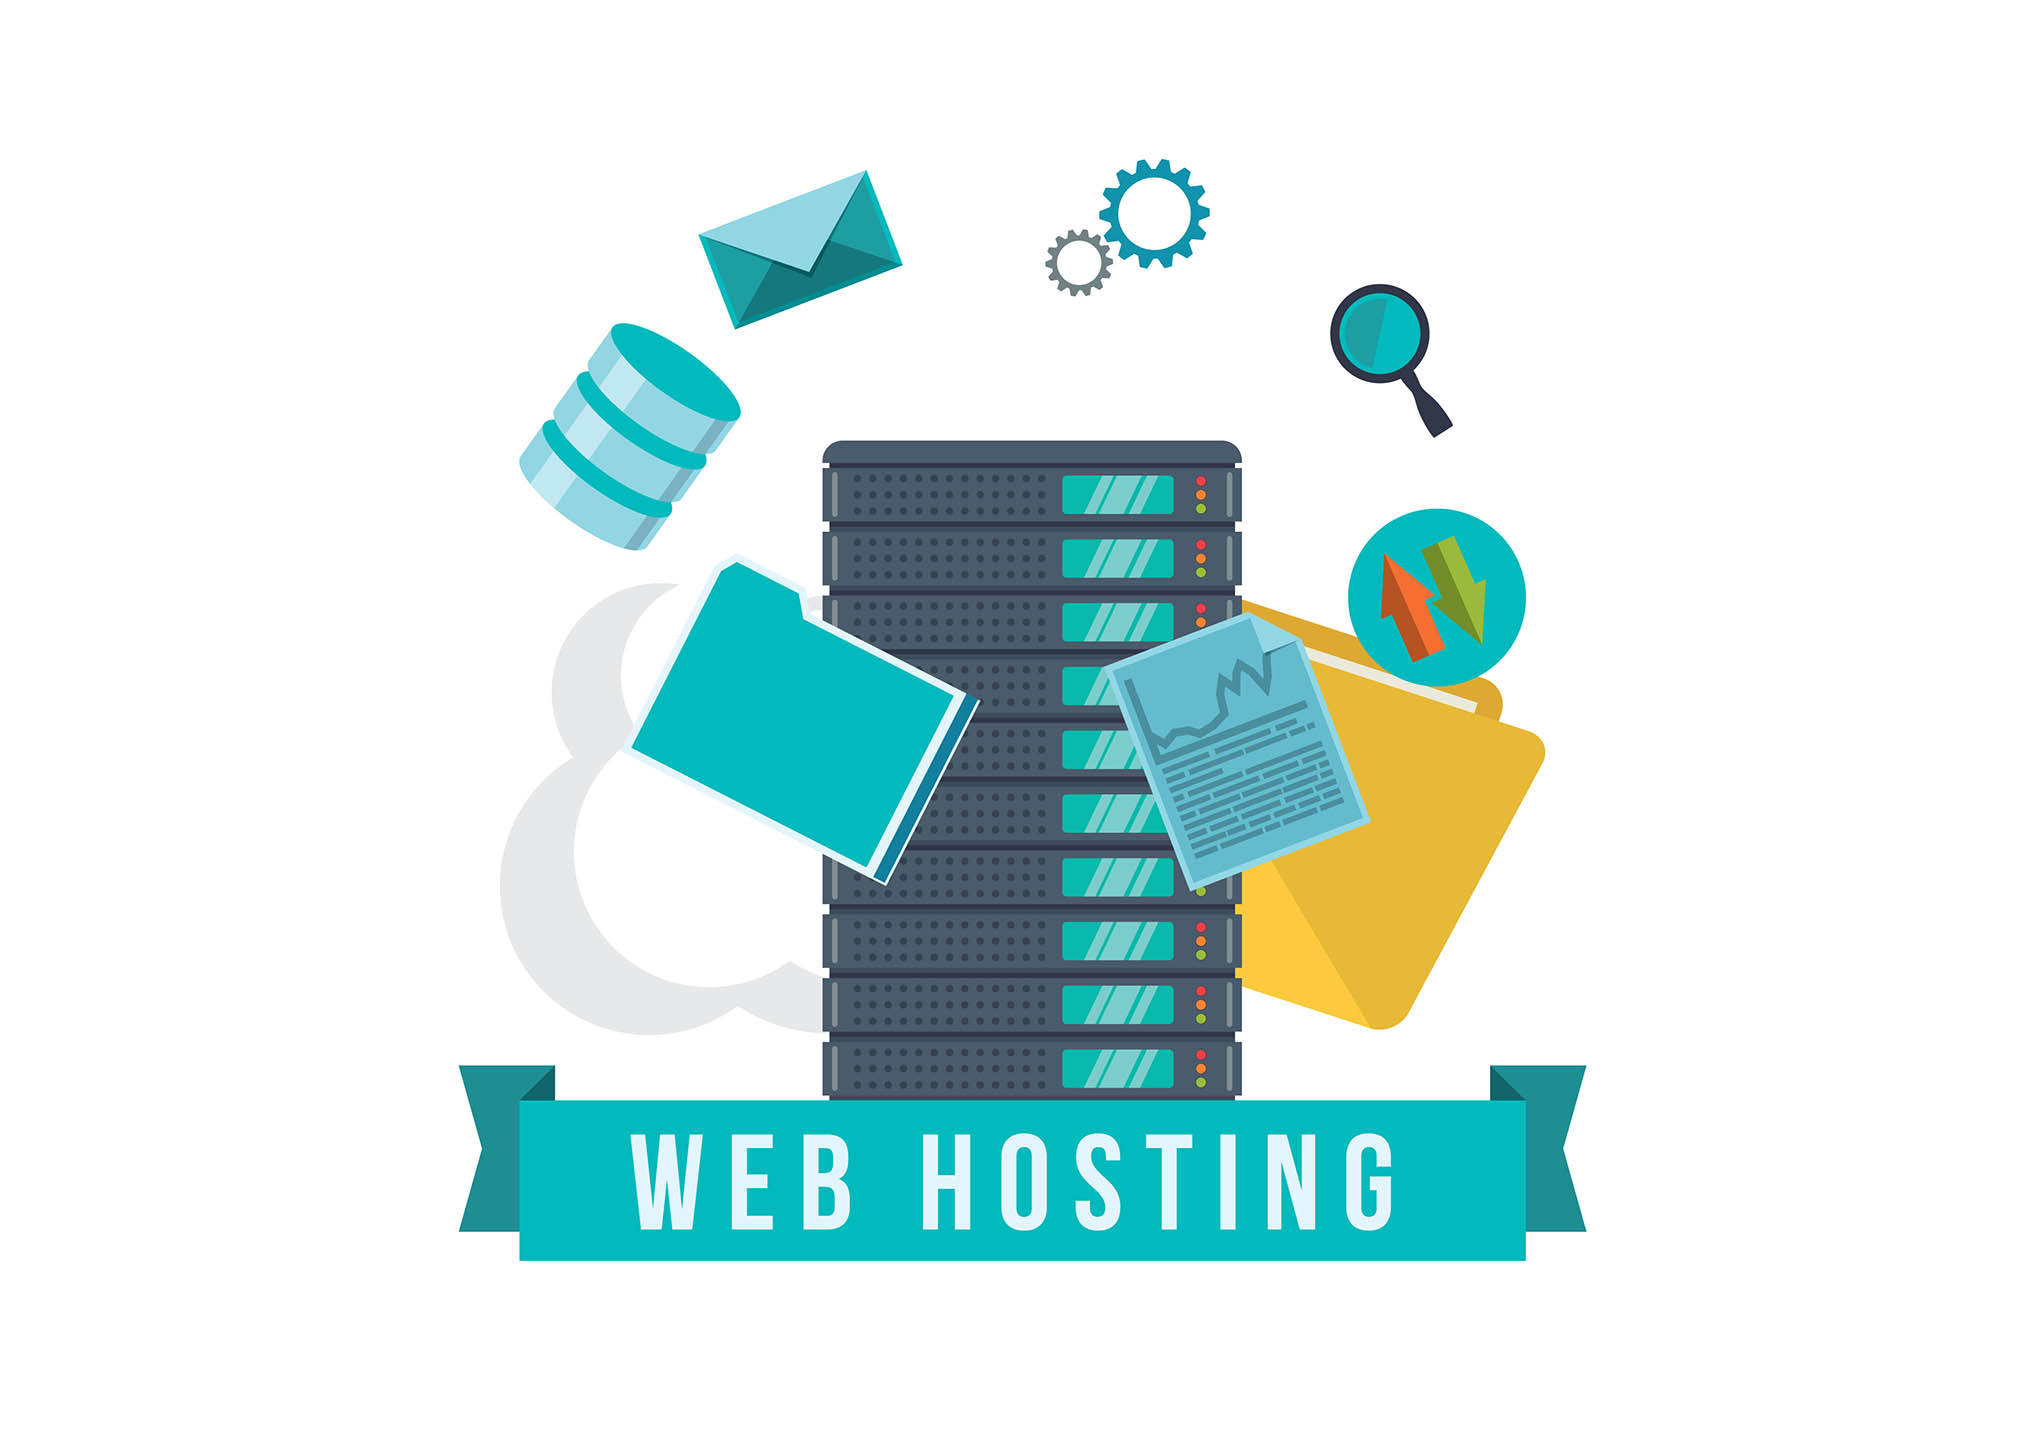 web hosting coupon and services